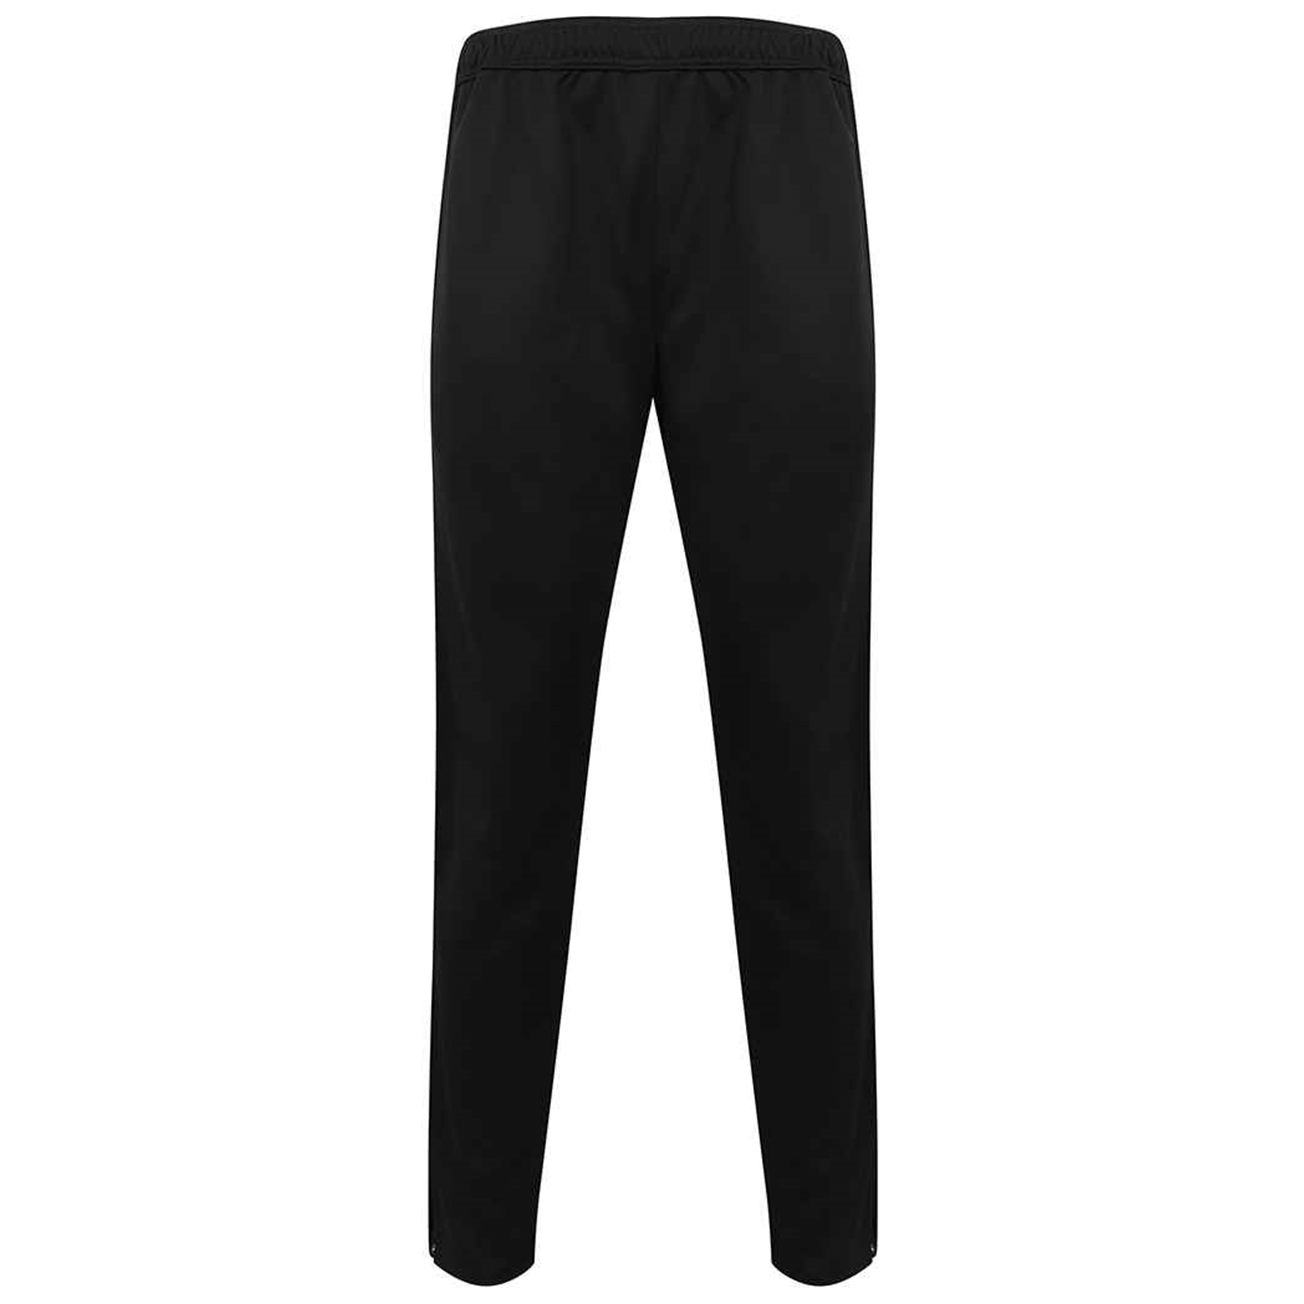 Dudley College Team Dudley Sports Studies - Tracksuit Bottoms [LV881]